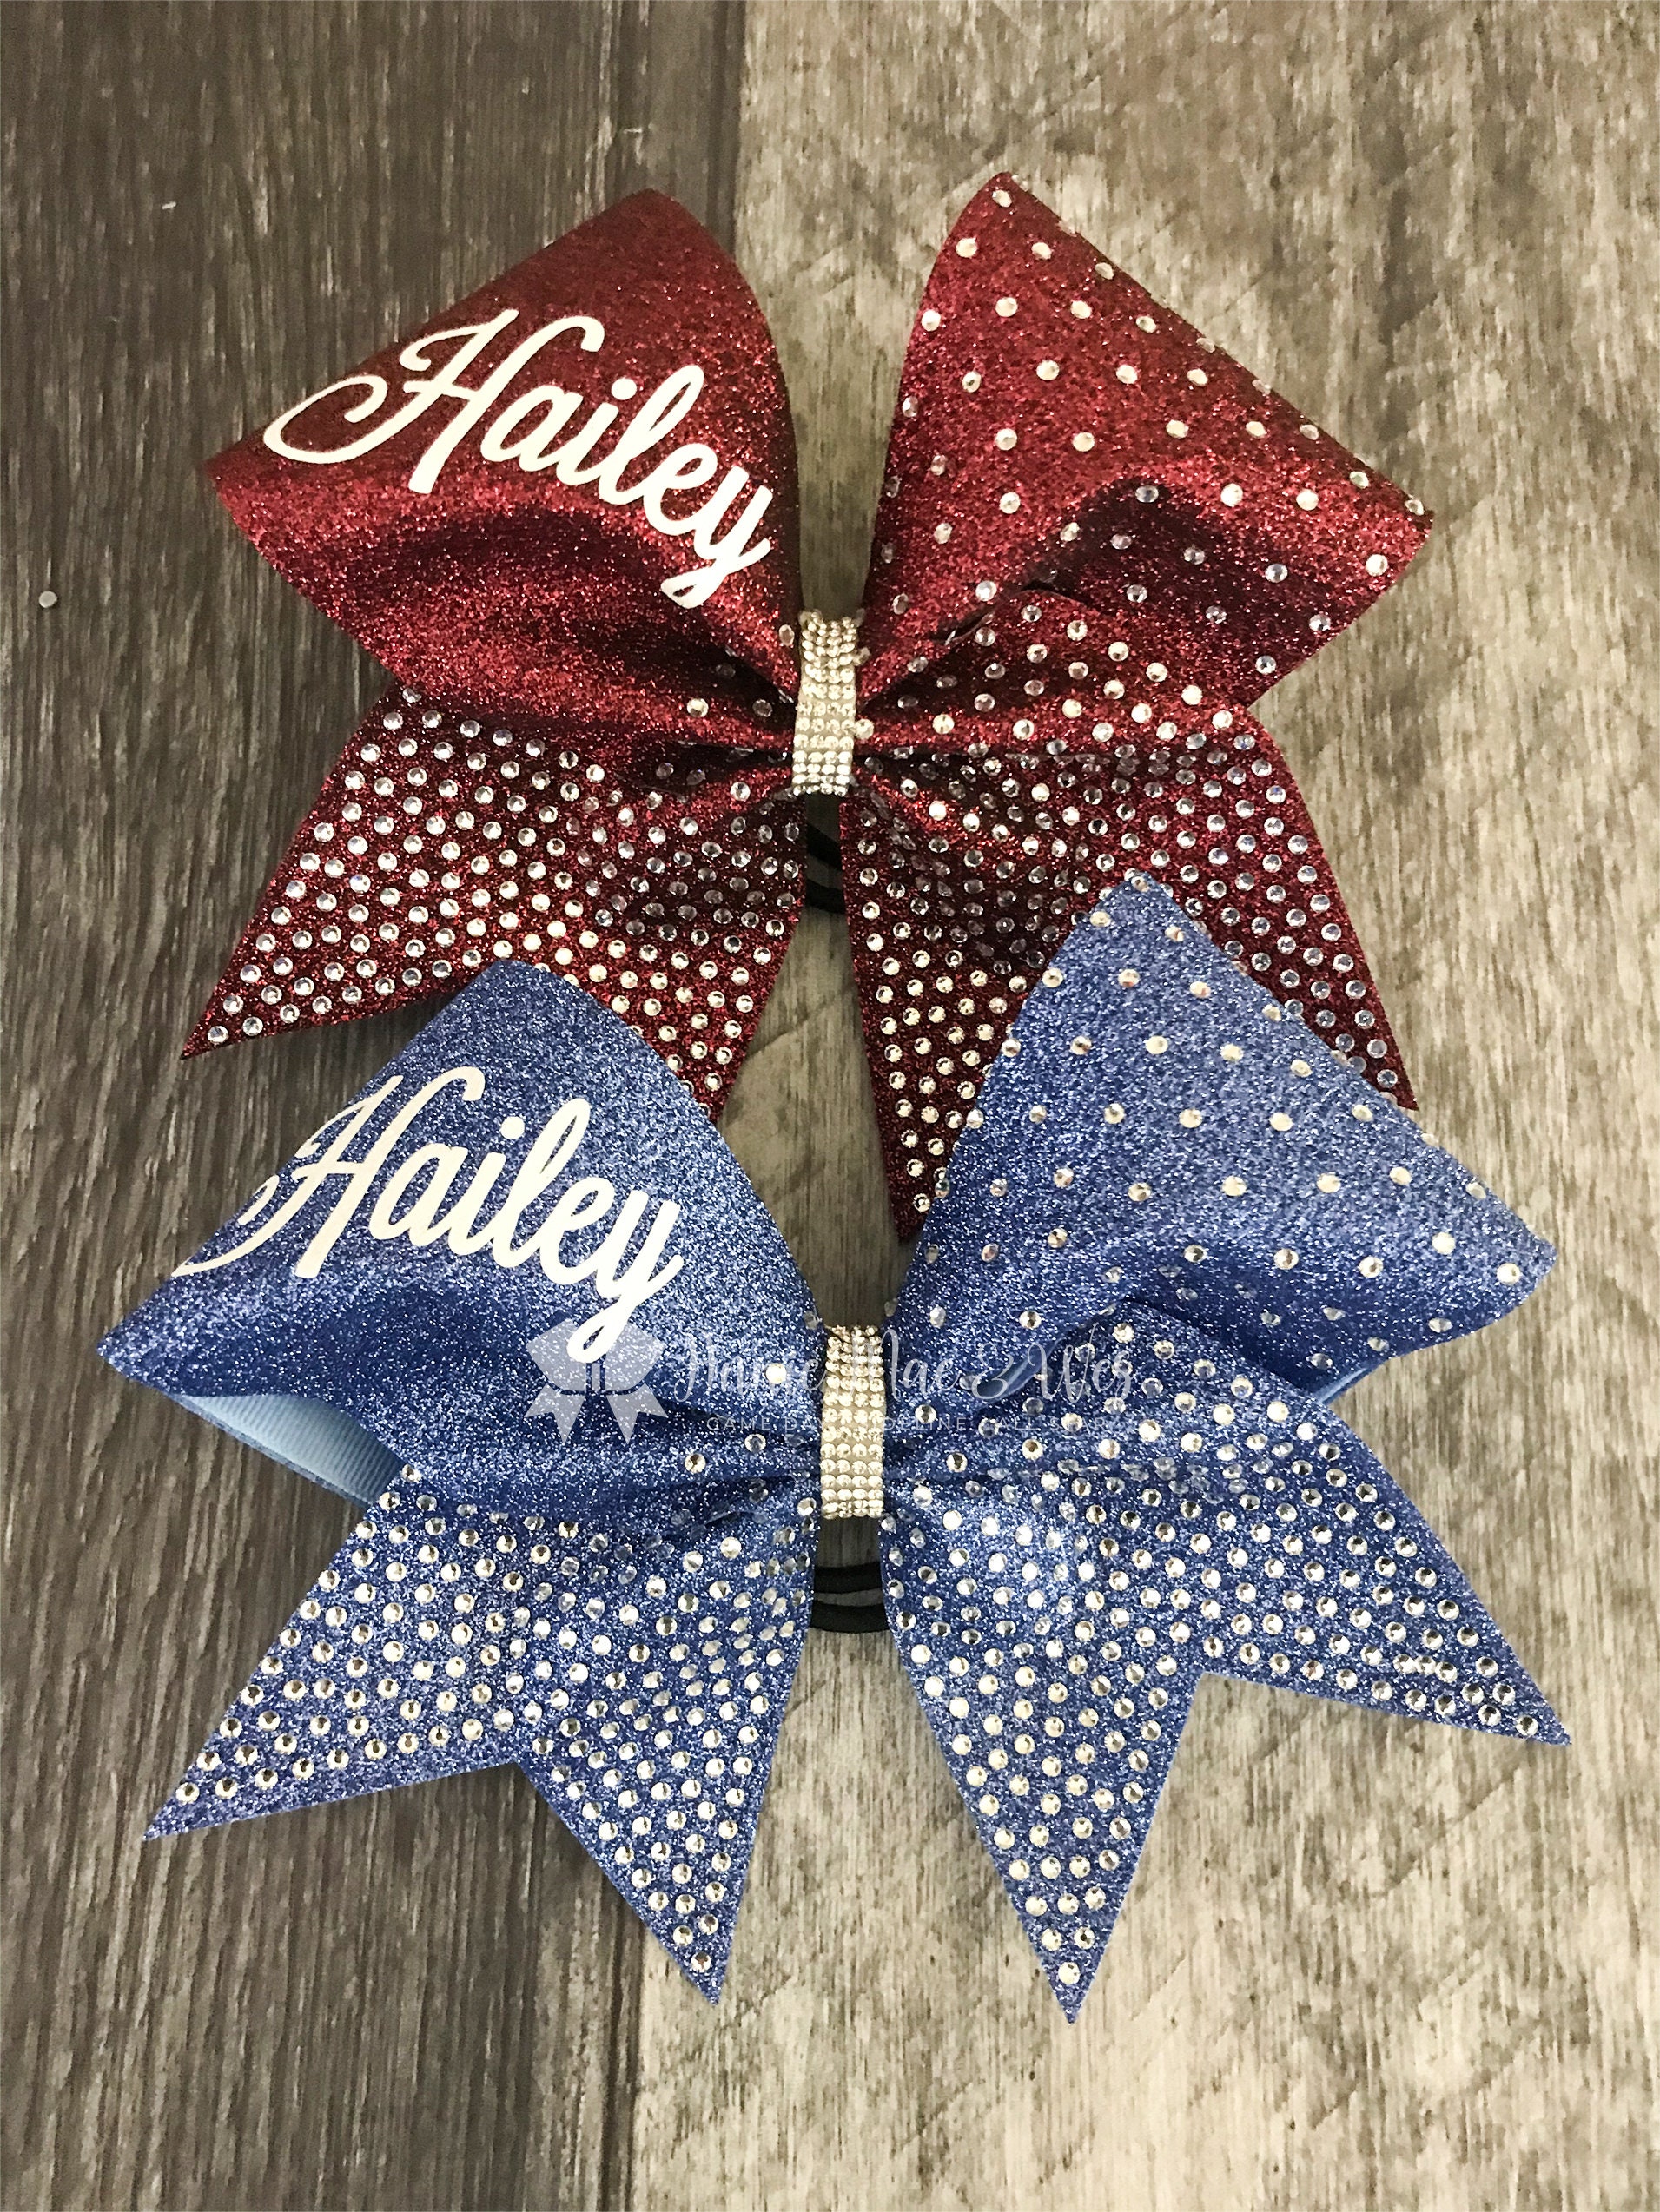 Red and White Rhinestone Cheer Bow// Competition Cheer Bows// Team